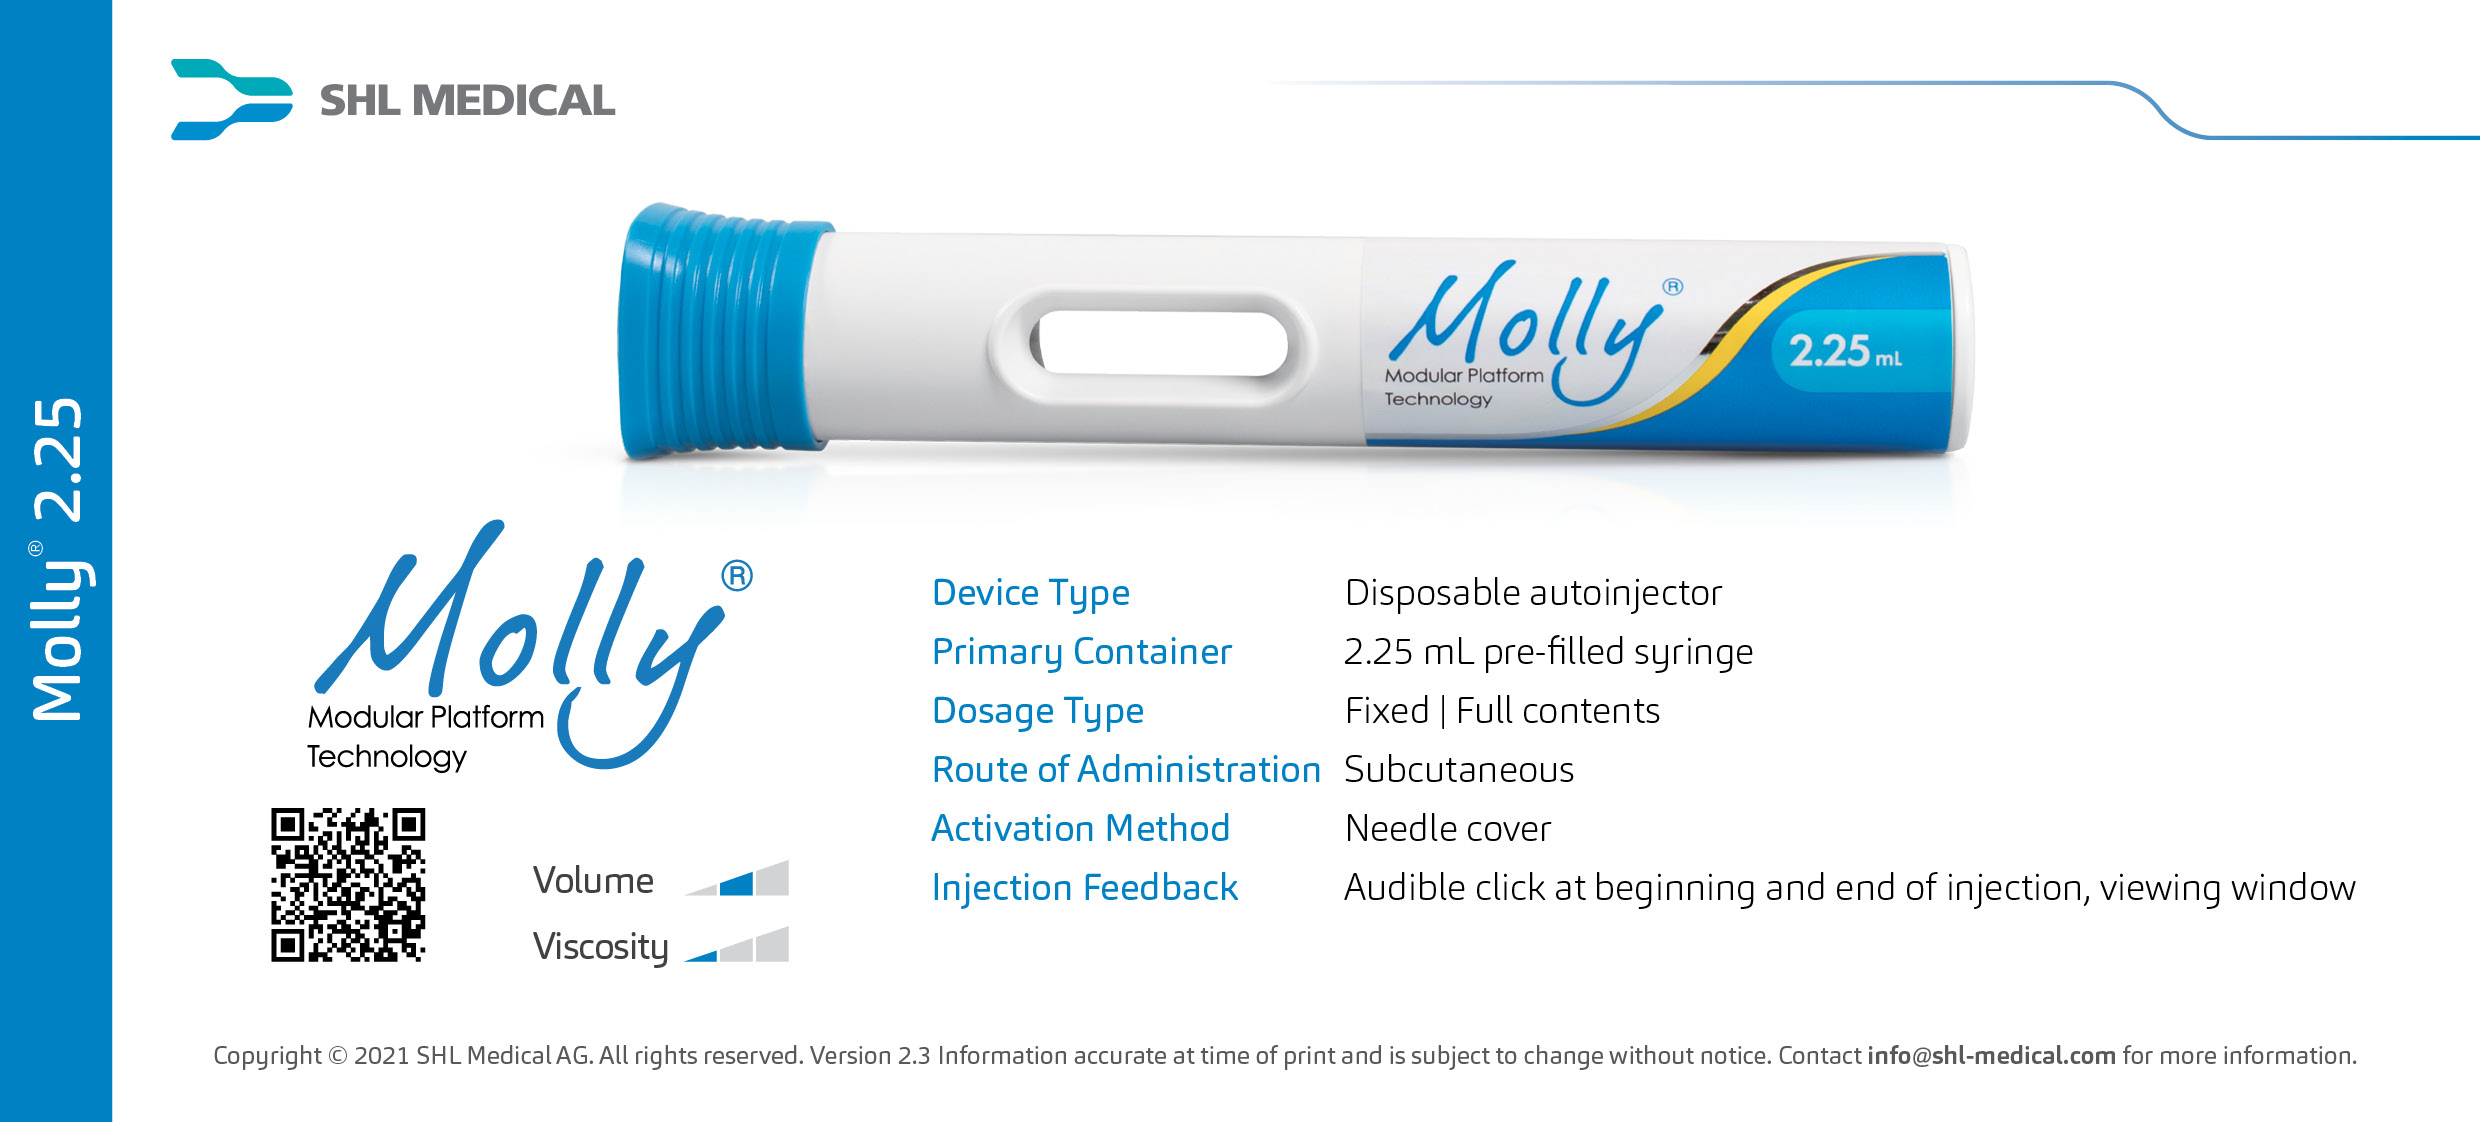 Image of standard Molly 2.25 autoinjector developed by SHL Medical along with its specifications and handling instruction